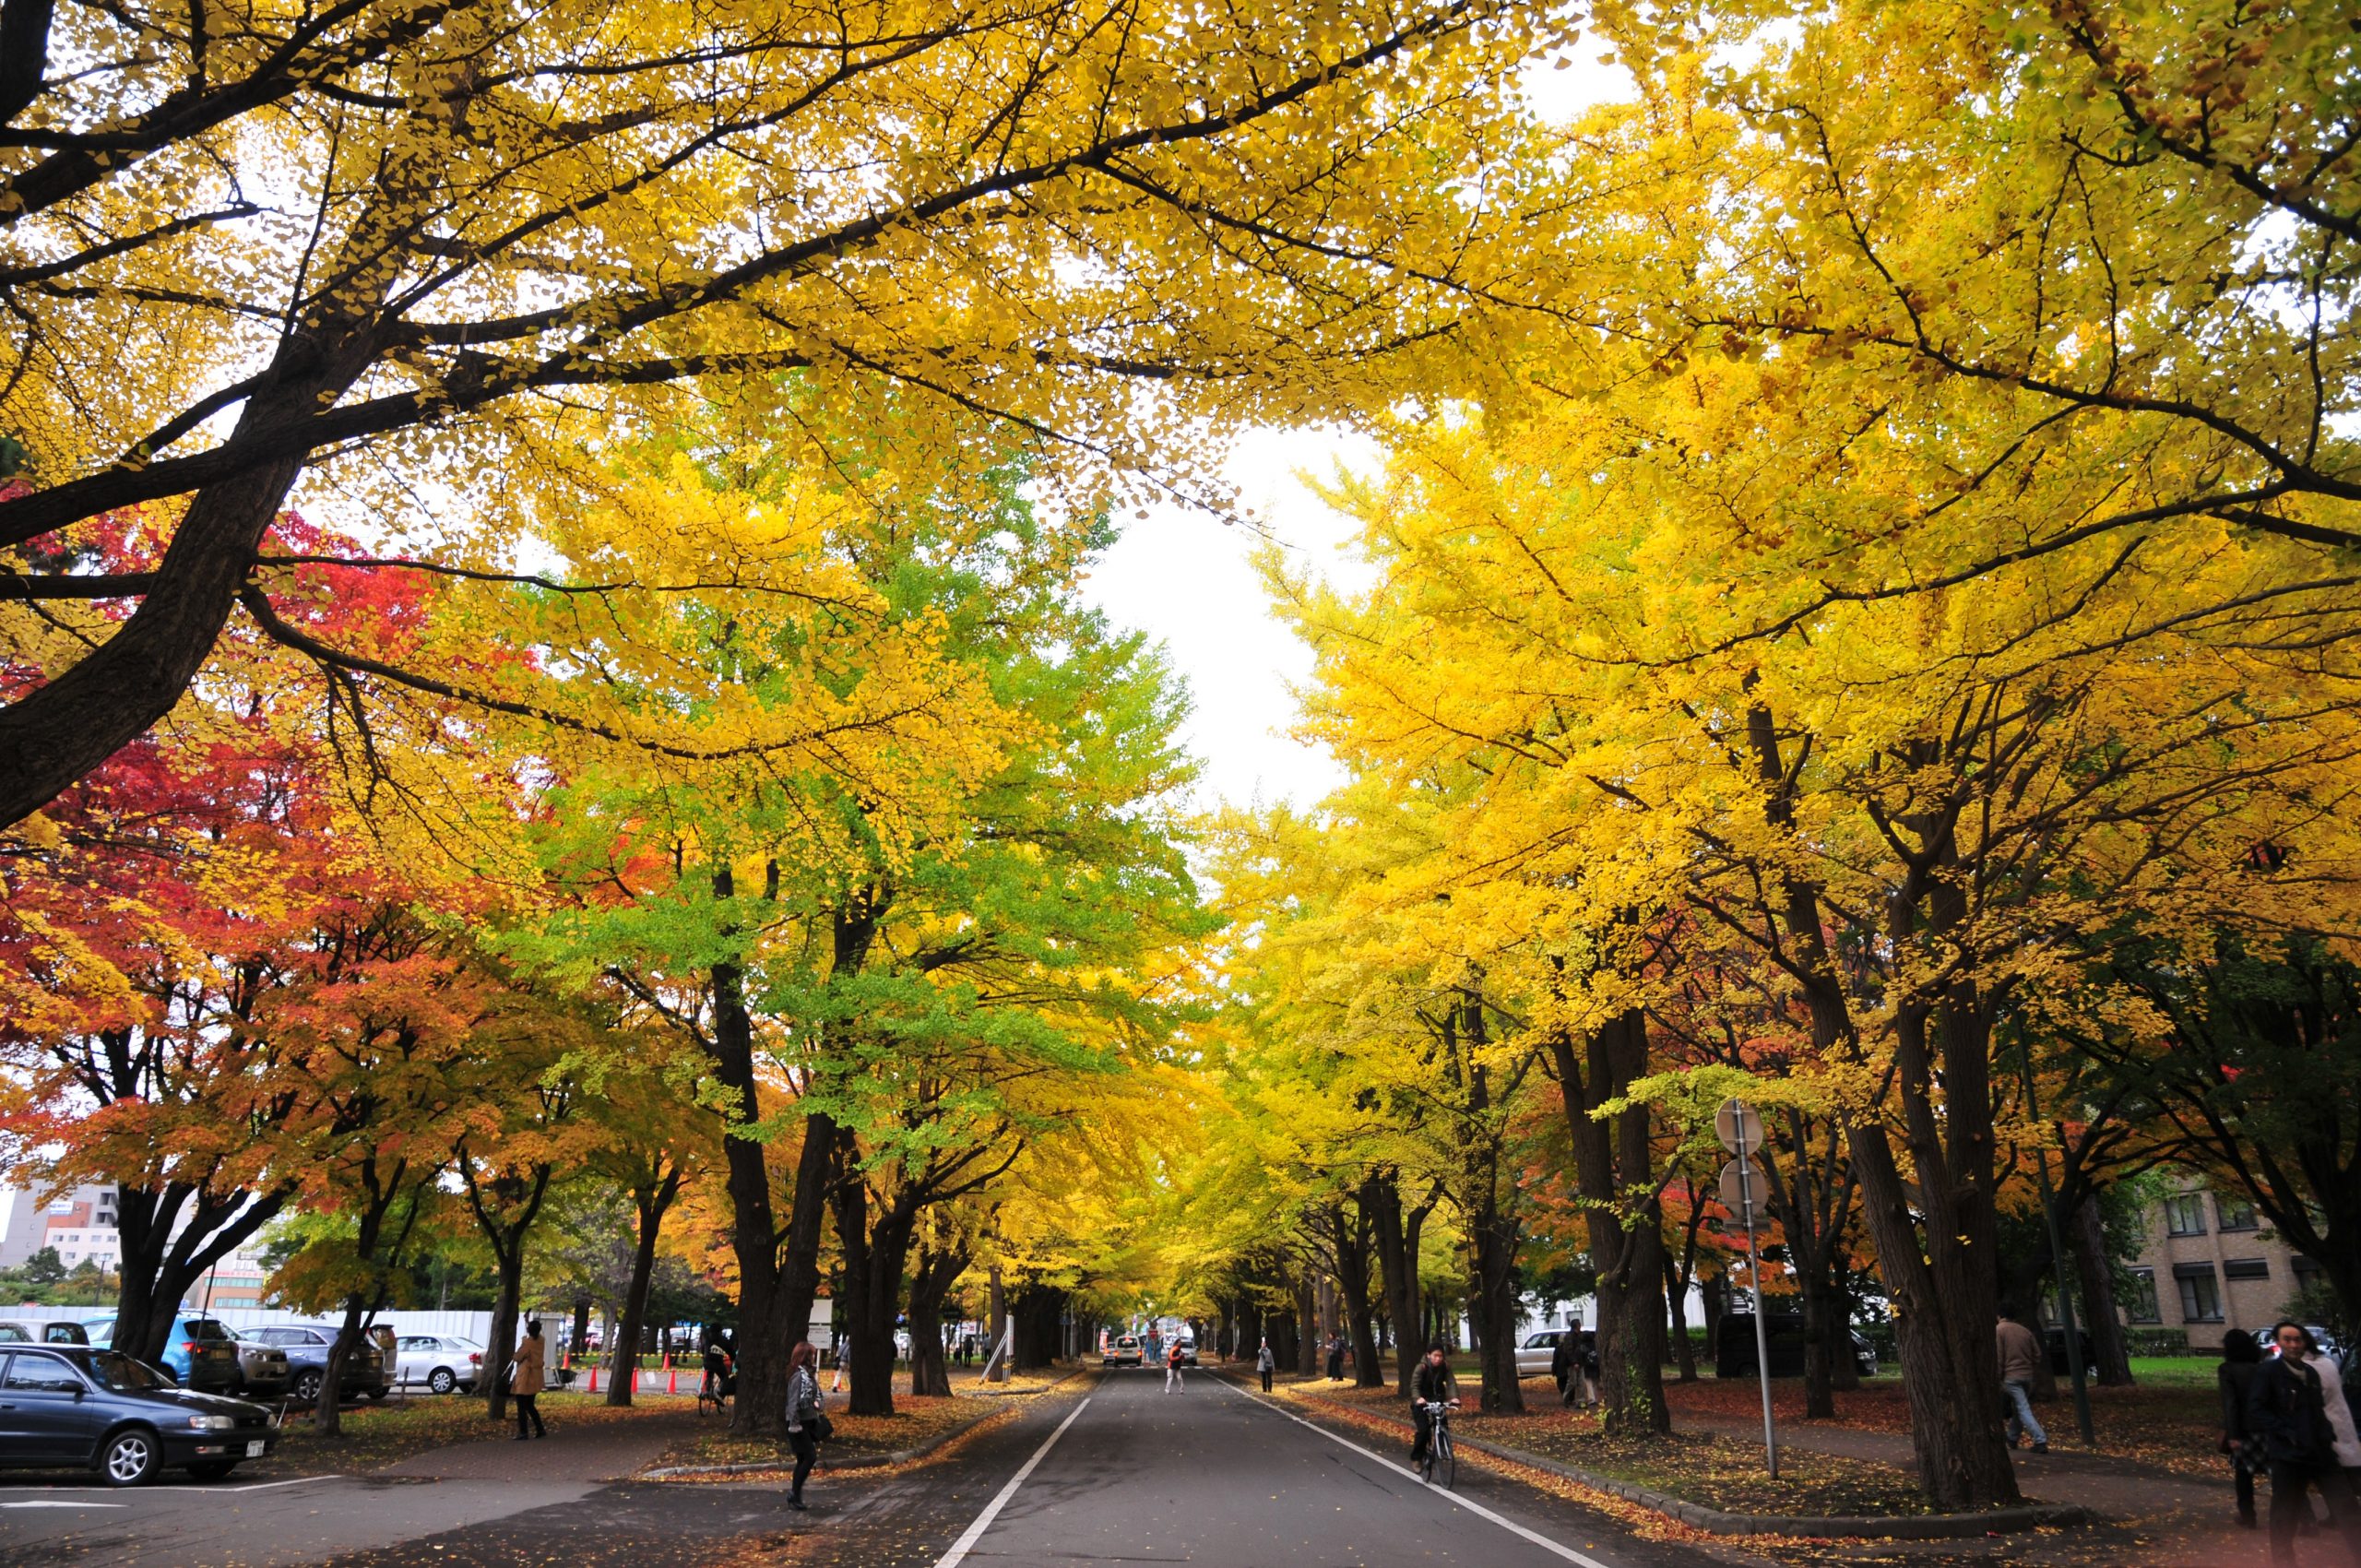 Nakajima Park is the ideal place to stay for couples and nature lovers